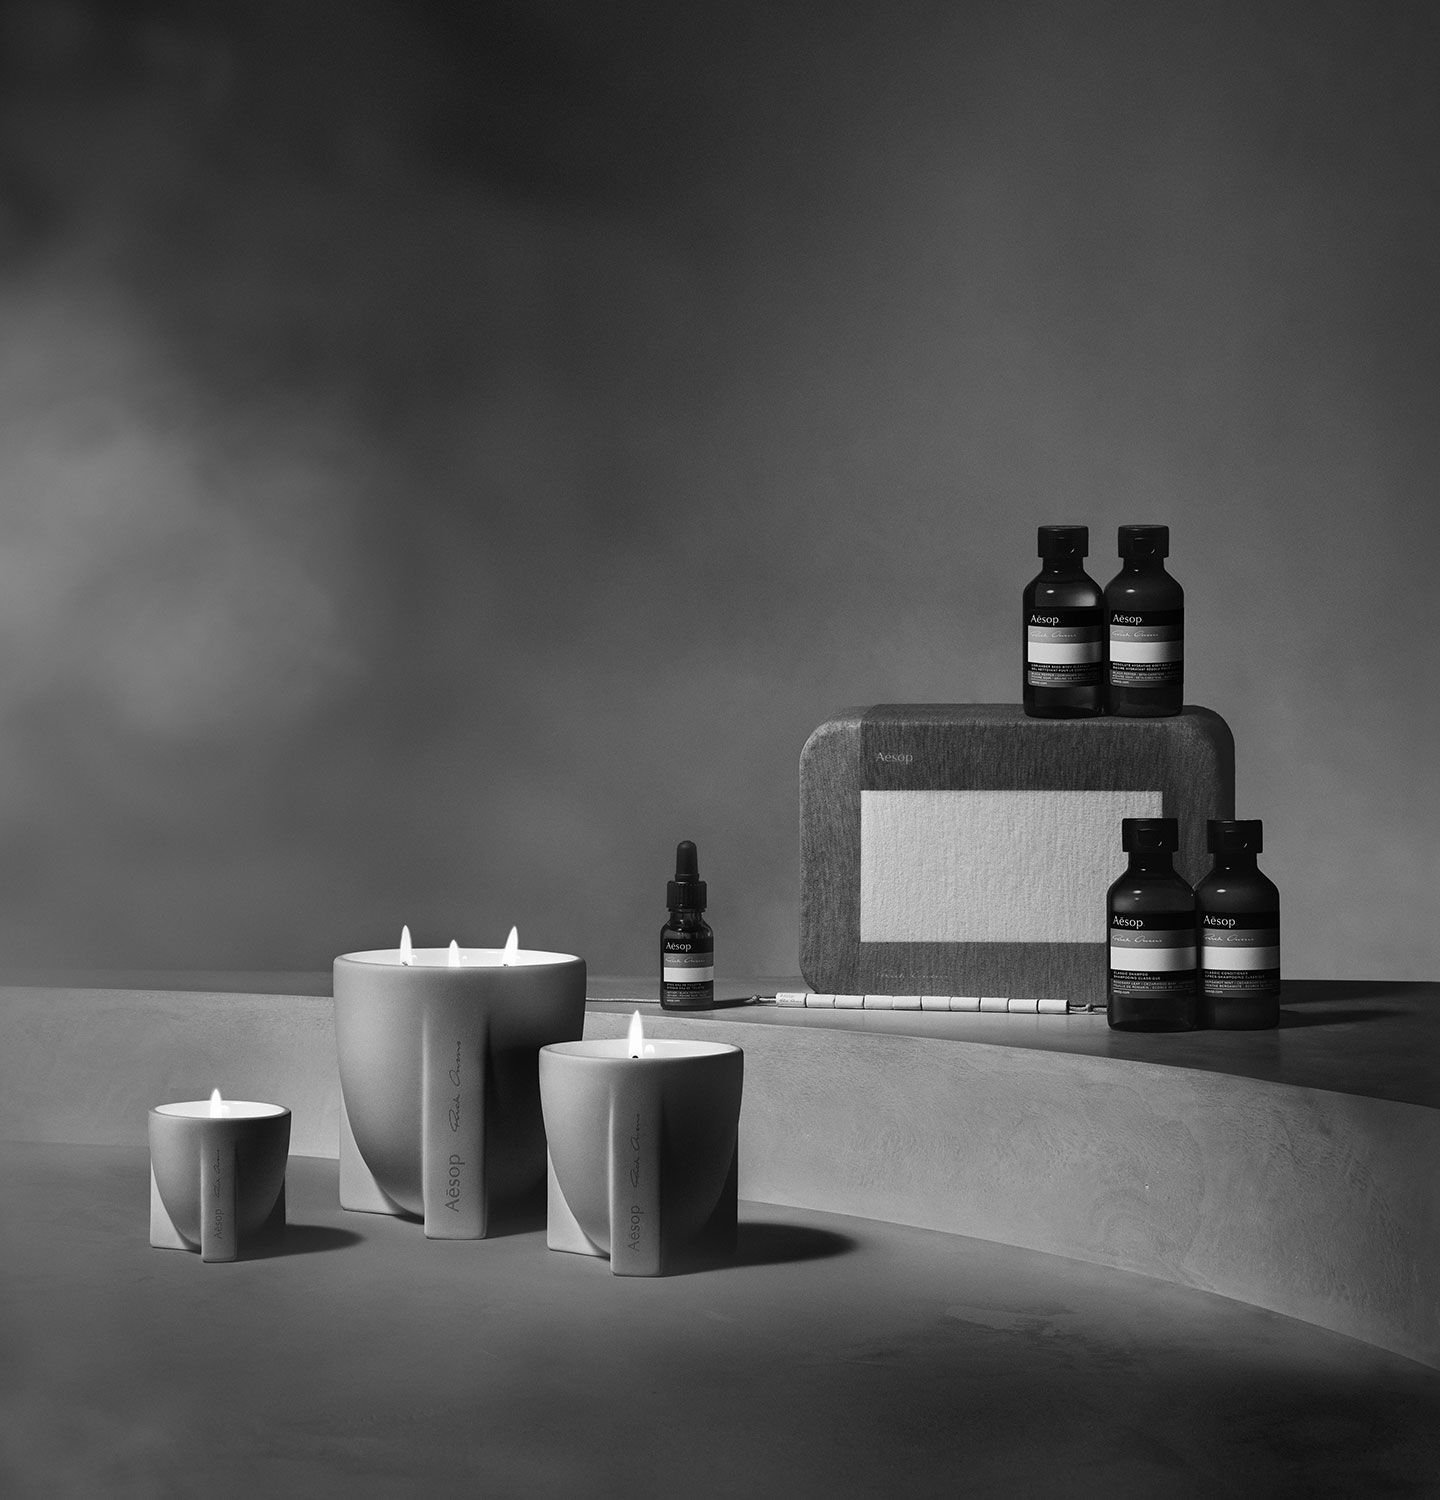 Aesop Rick Owen Travel Kit and Stoic Aromatique Candles sitting on a concrete surface.